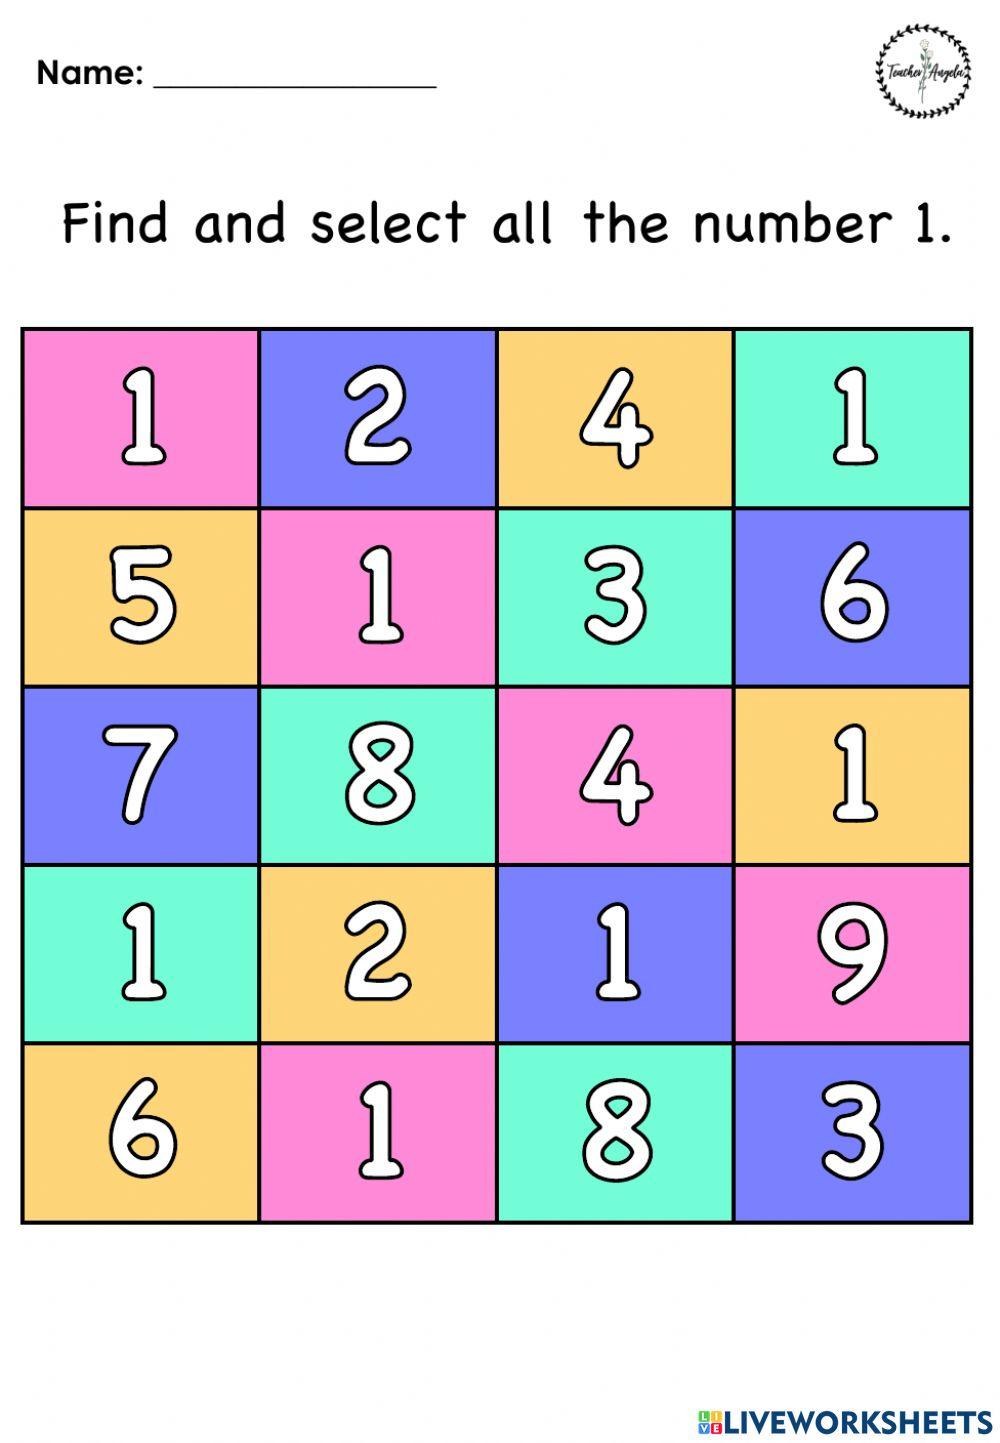 Find the number 1